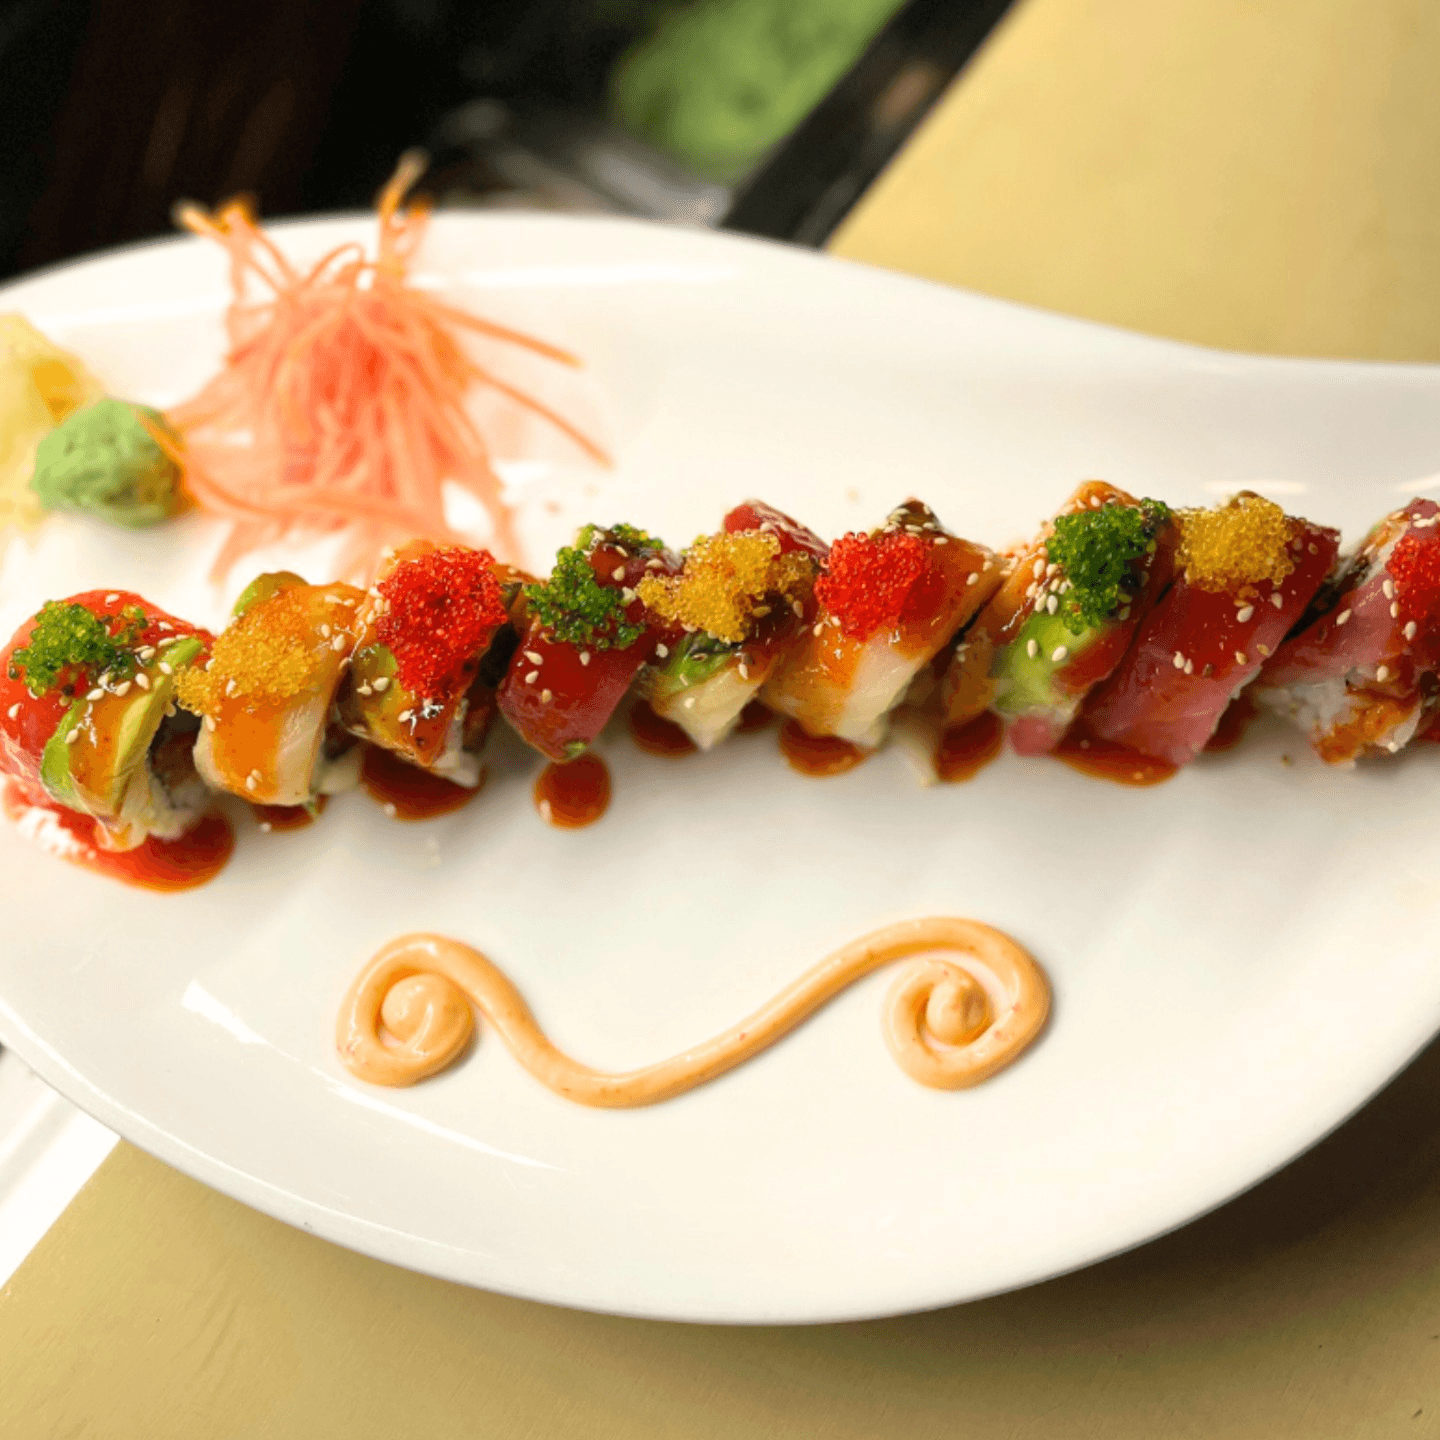 The Triton Roll: Sushi Symphony of Flavors!